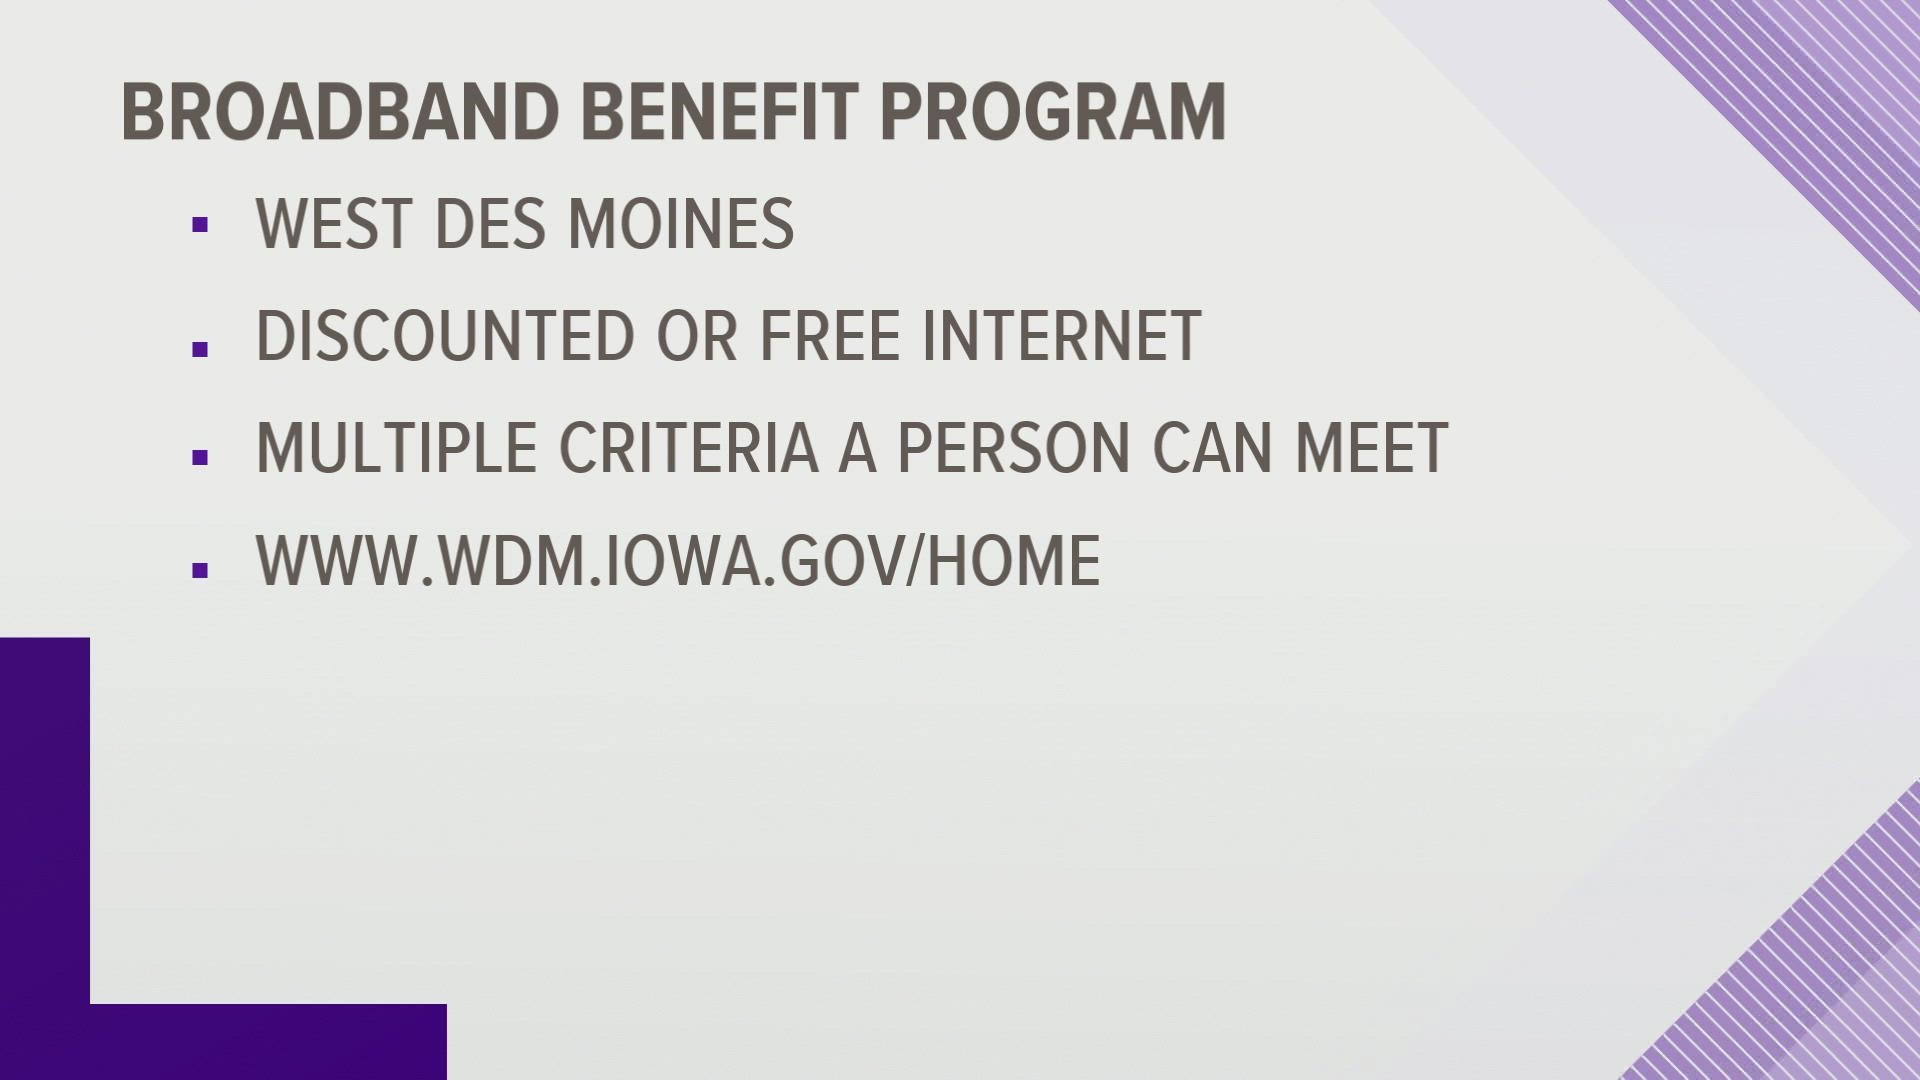 The program provides discounted or free internet service to help those struggling to afford it.